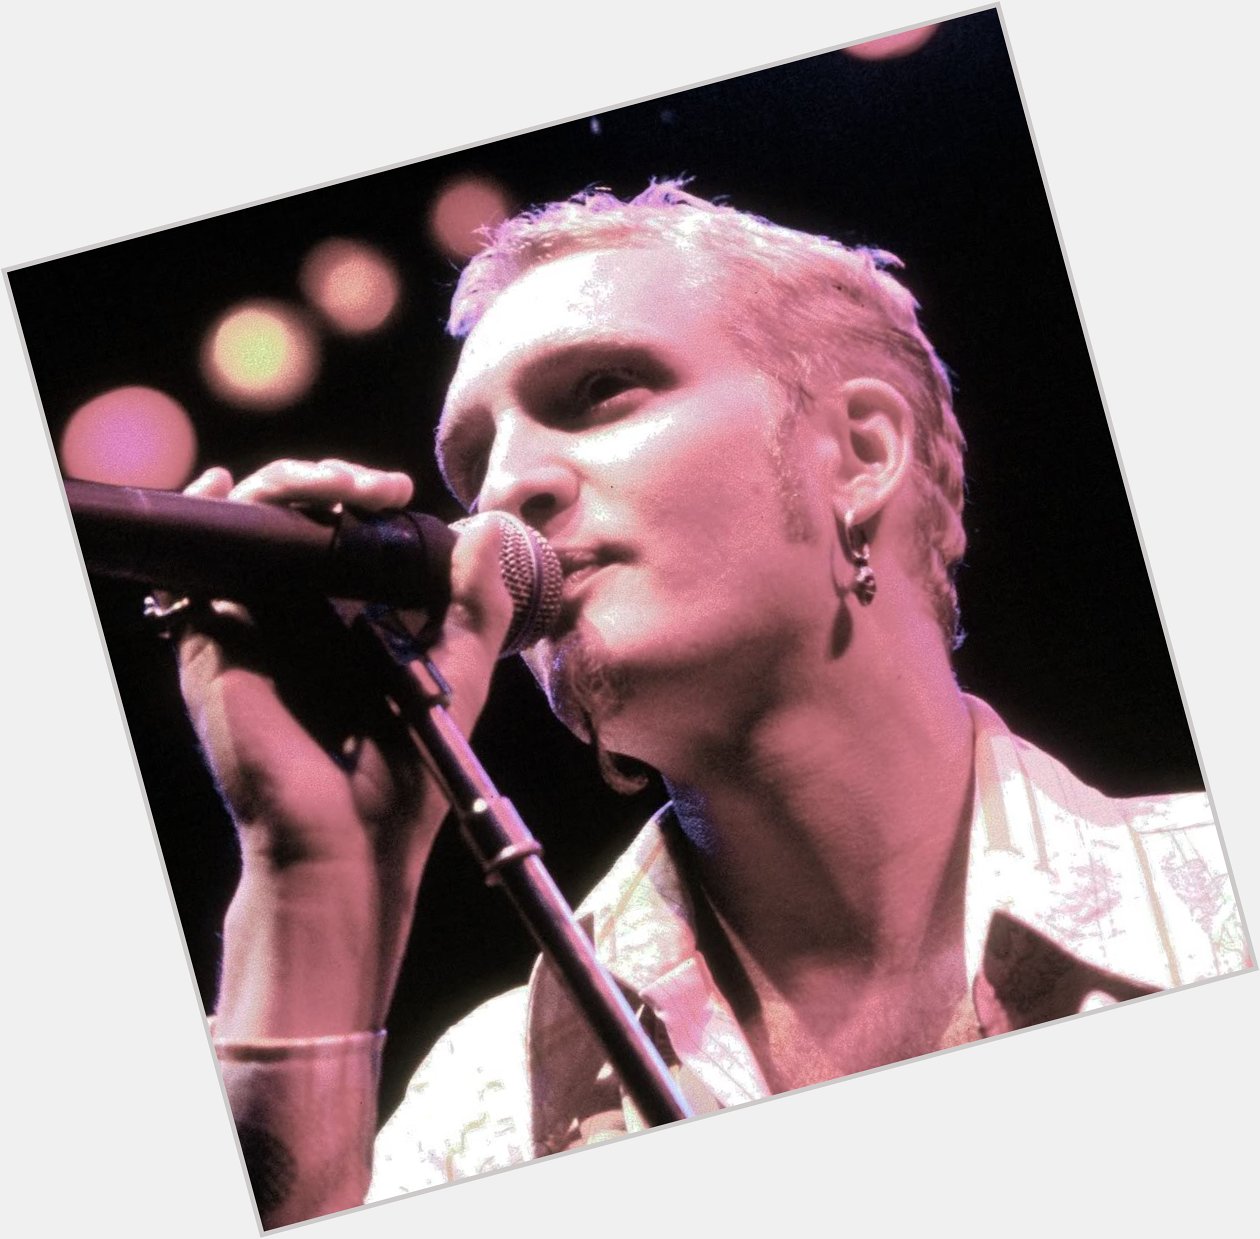 Layne Staley would have turned 50 today. Happy birthday, Sickman. I\ll always love your voice and your music. 